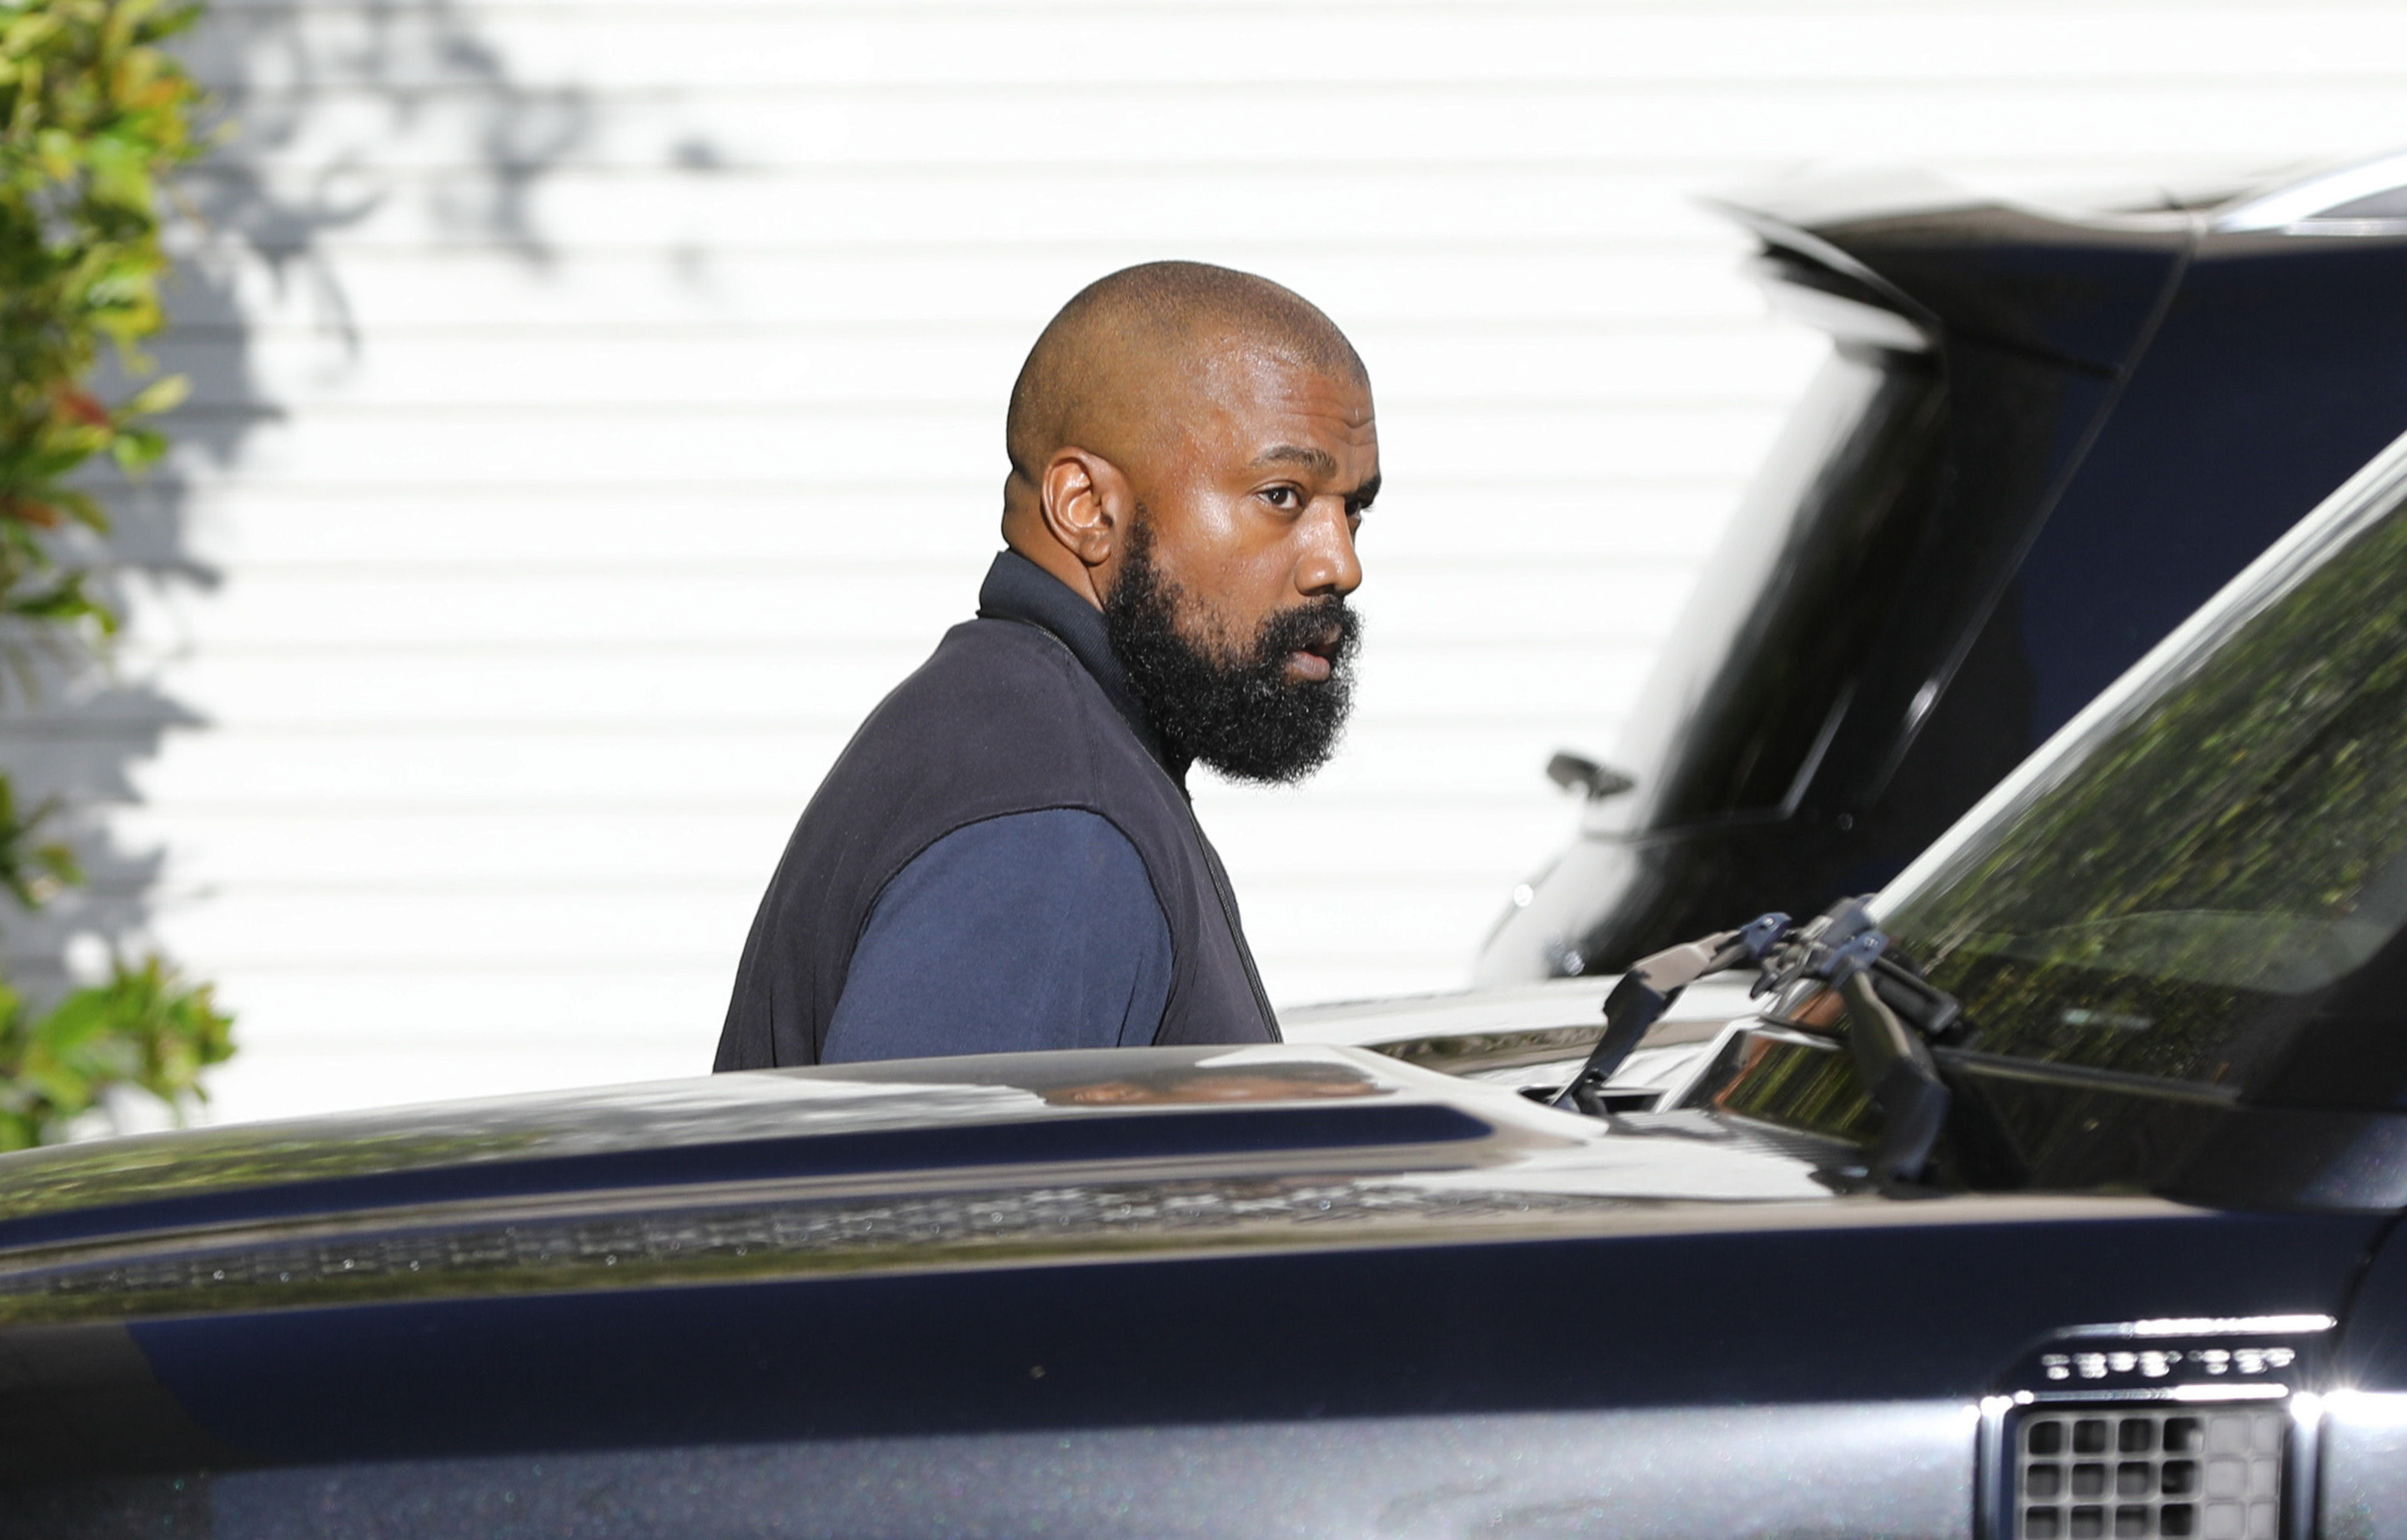 Kanye West was briefly spotted outside of North's game donning a scraggly beard